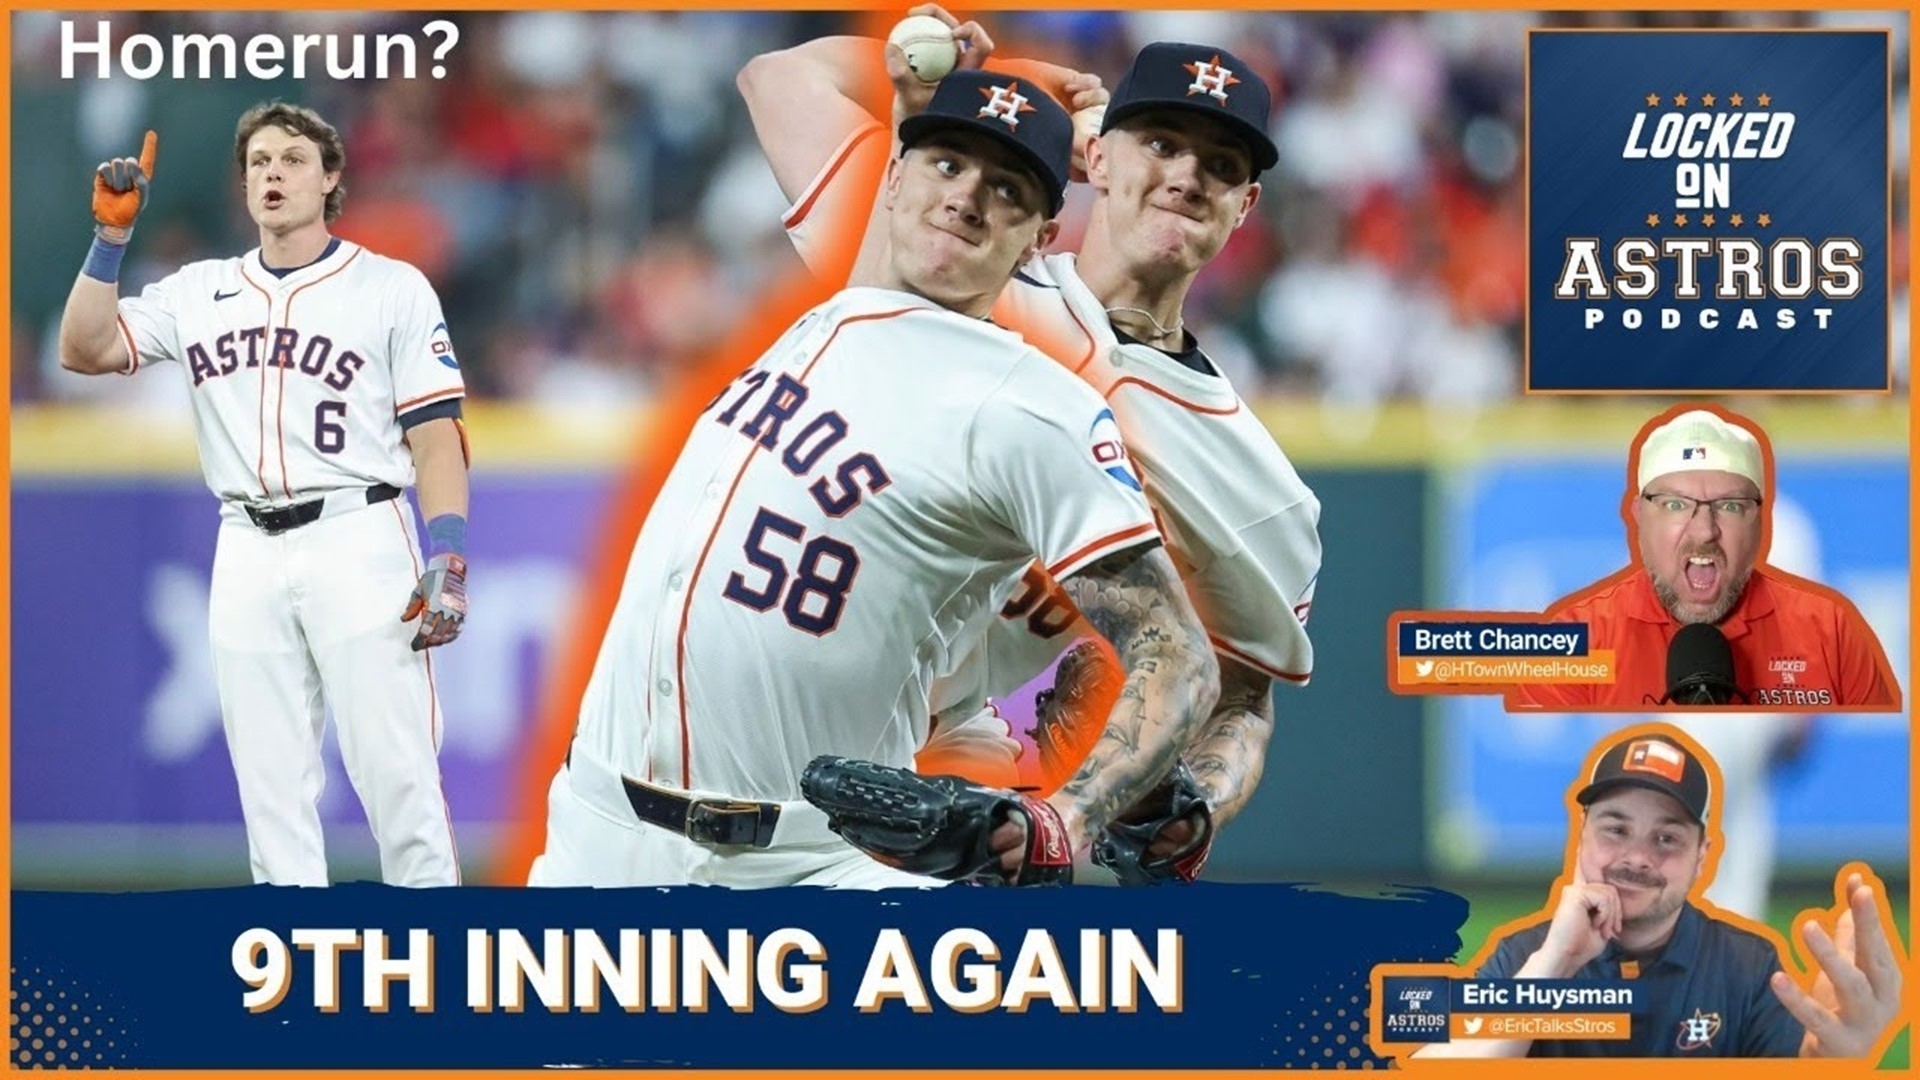 Join Eric Huysman and Brett Chancey for the Locked On Astros podcast to discuss the Astros moves from today and what's next for Justin Verlander.